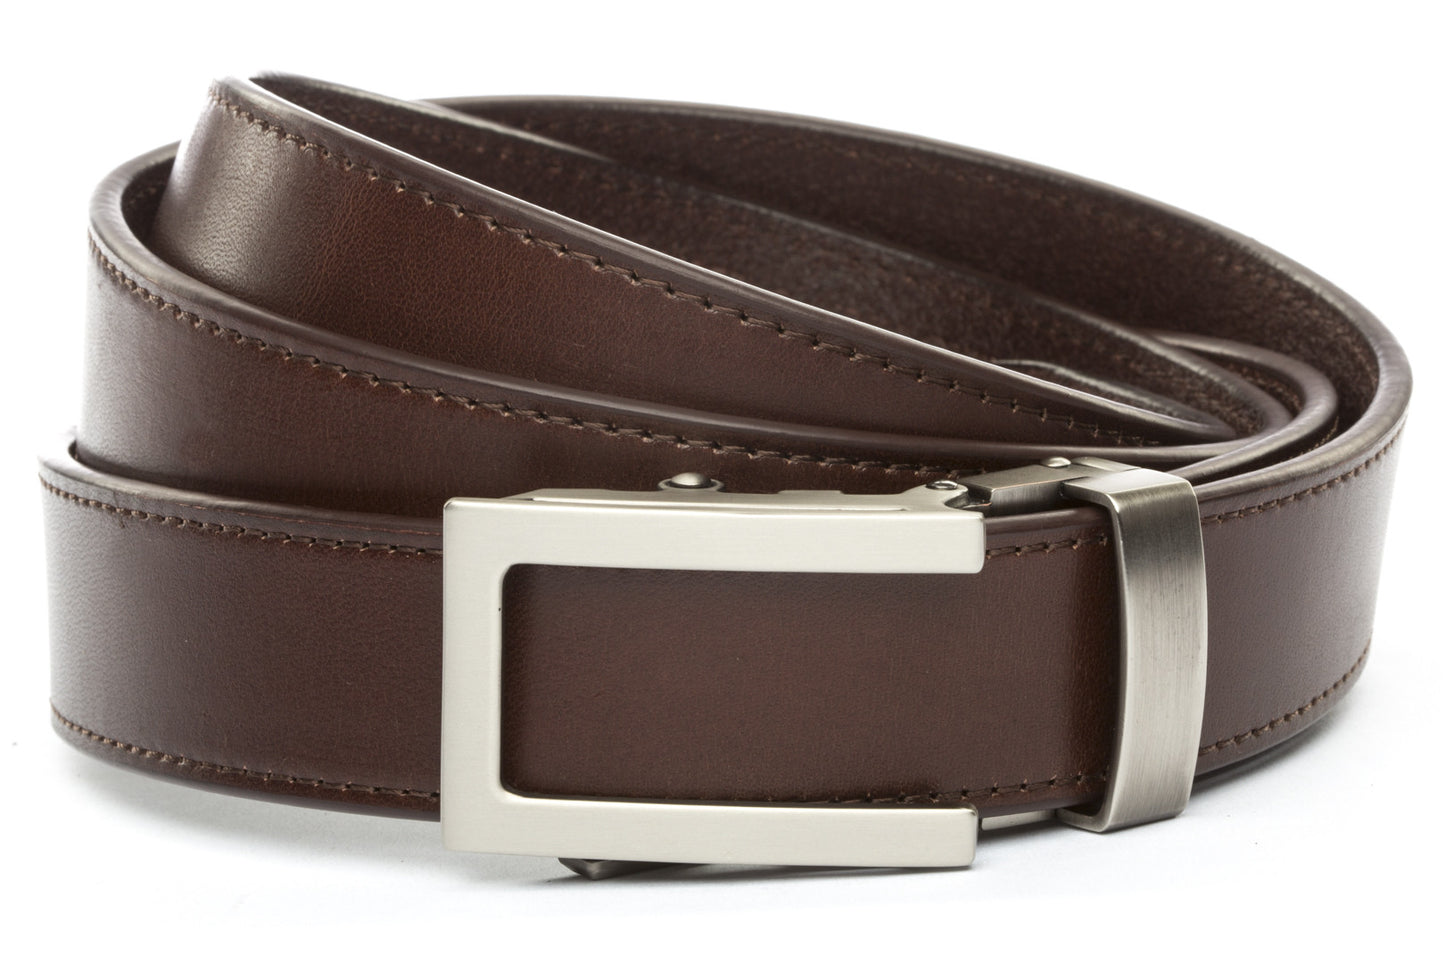 Chocolate Vegetable Tanned Leather w/Traditional in Gunmetal Buckle (1.25") - Anson Belt & Buckle